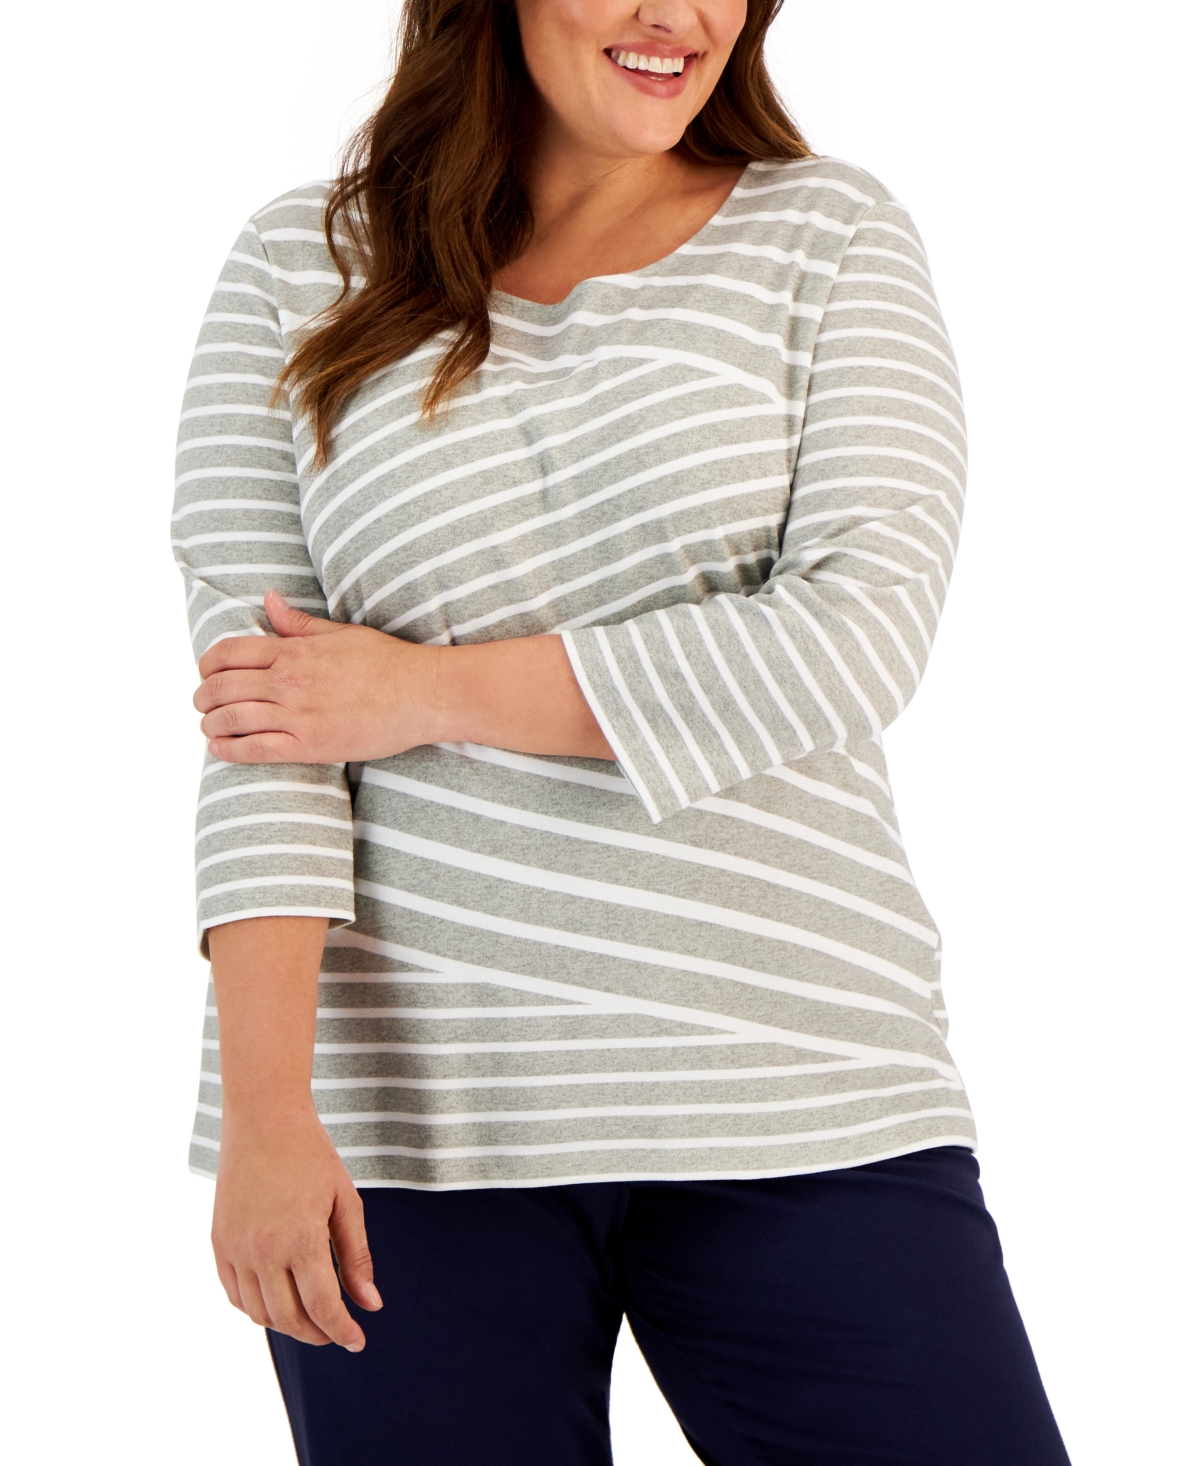 Plus Size 3/4-Sleeve Striped Top, Created for Macy's - Smoke Grey Heather